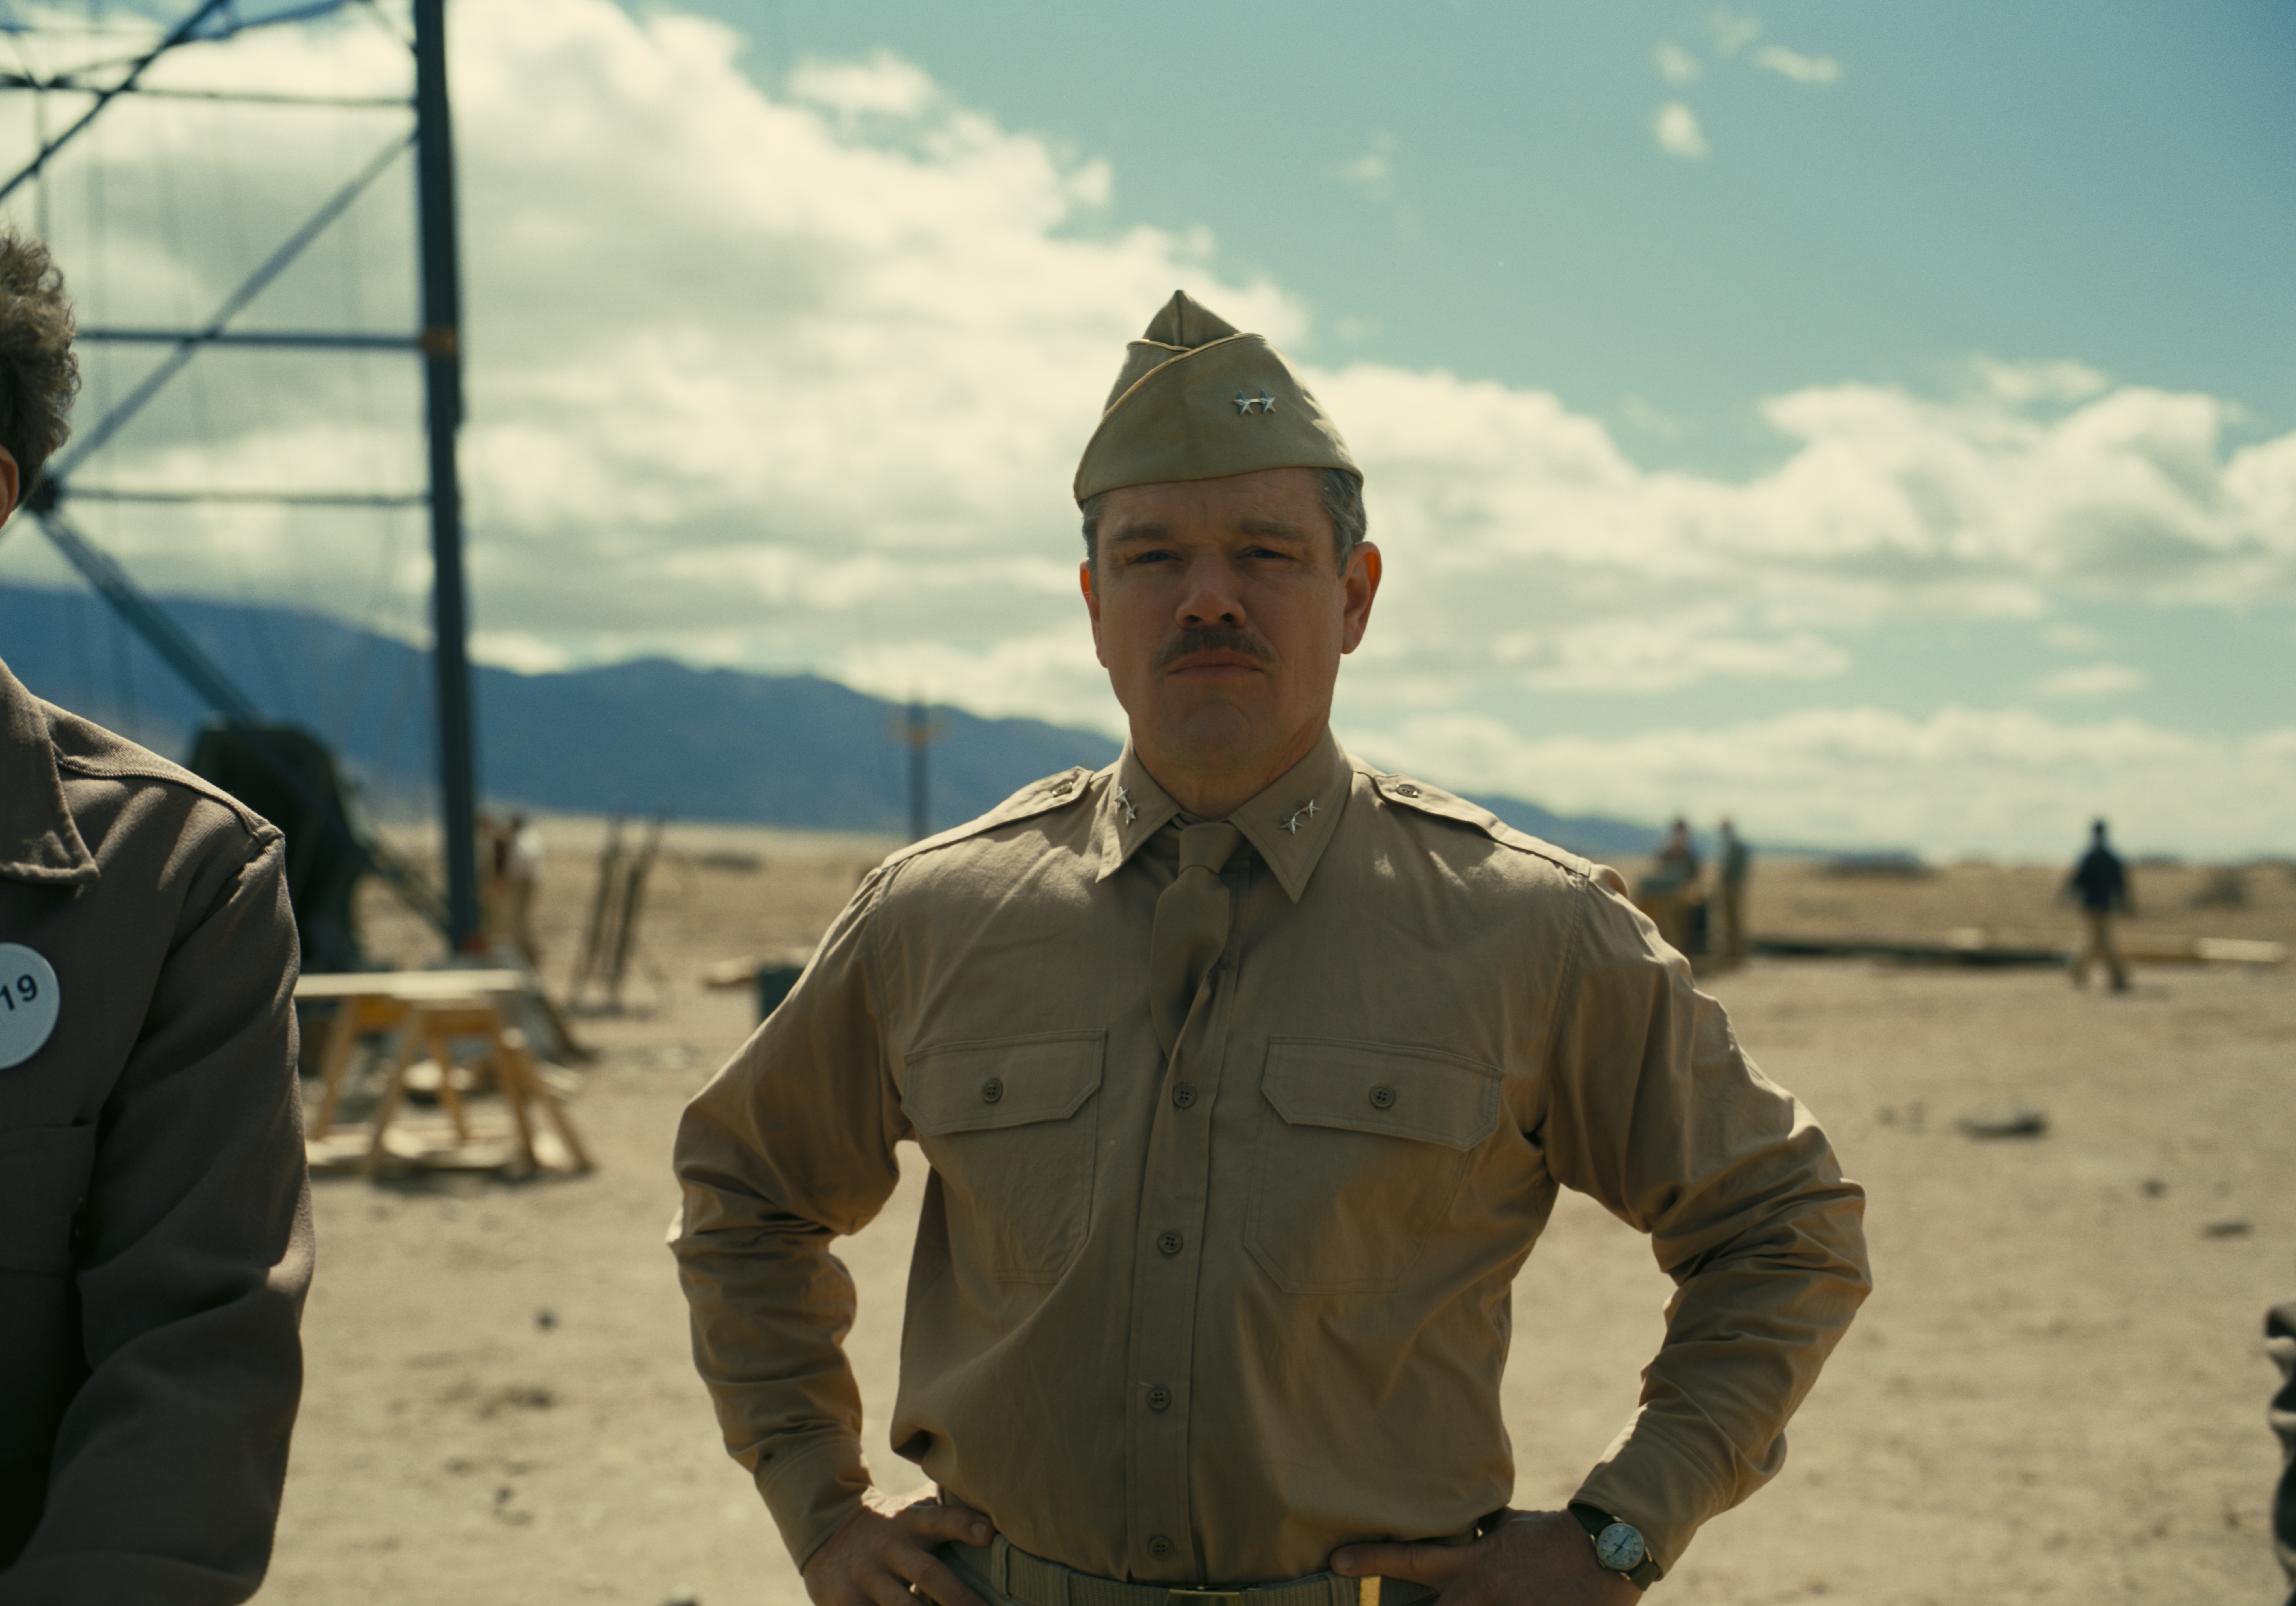 HD desktop wallpaper featuring a man in a vintage military uniform standing with confidence against a desert backdrop, reminiscent of a historical drama scene.